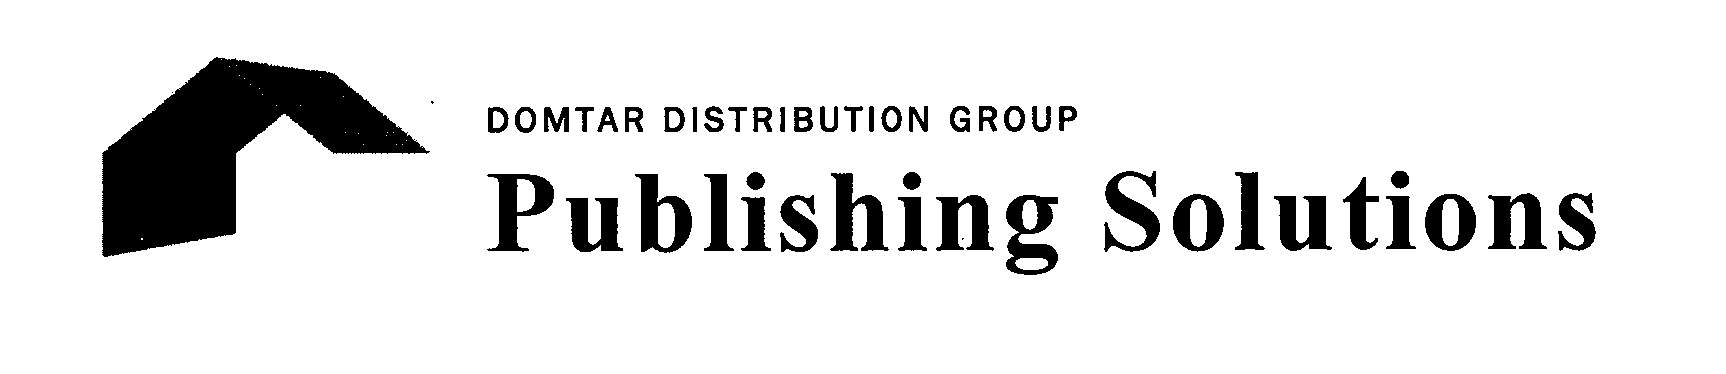  DOMTAR DISTRIBUTION GROUP PUBLISHING SOLUTIONS